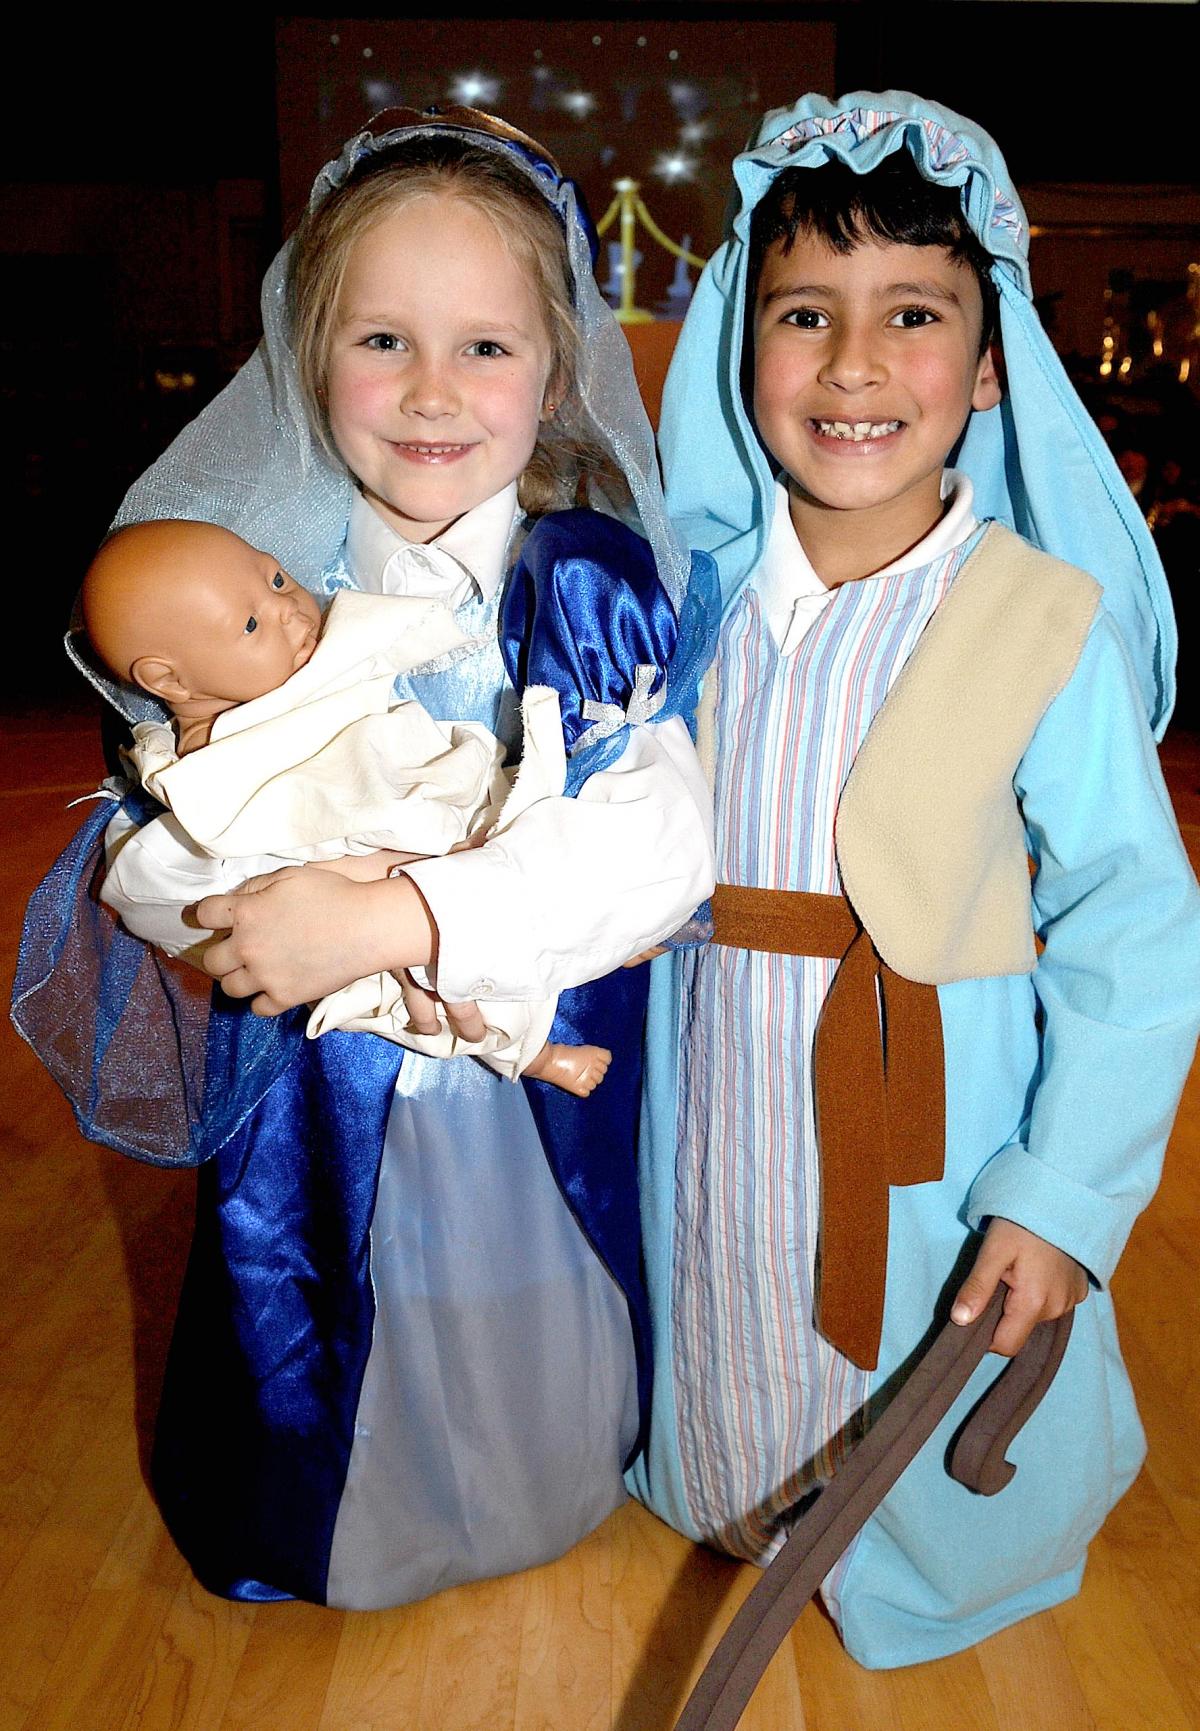 Appearing in Low Moor CE Primary School Nativity 'The Stars Come Out At Christmas' were Autumn Turnbull (Mary) and Hari Singh Gosal (Joseph)